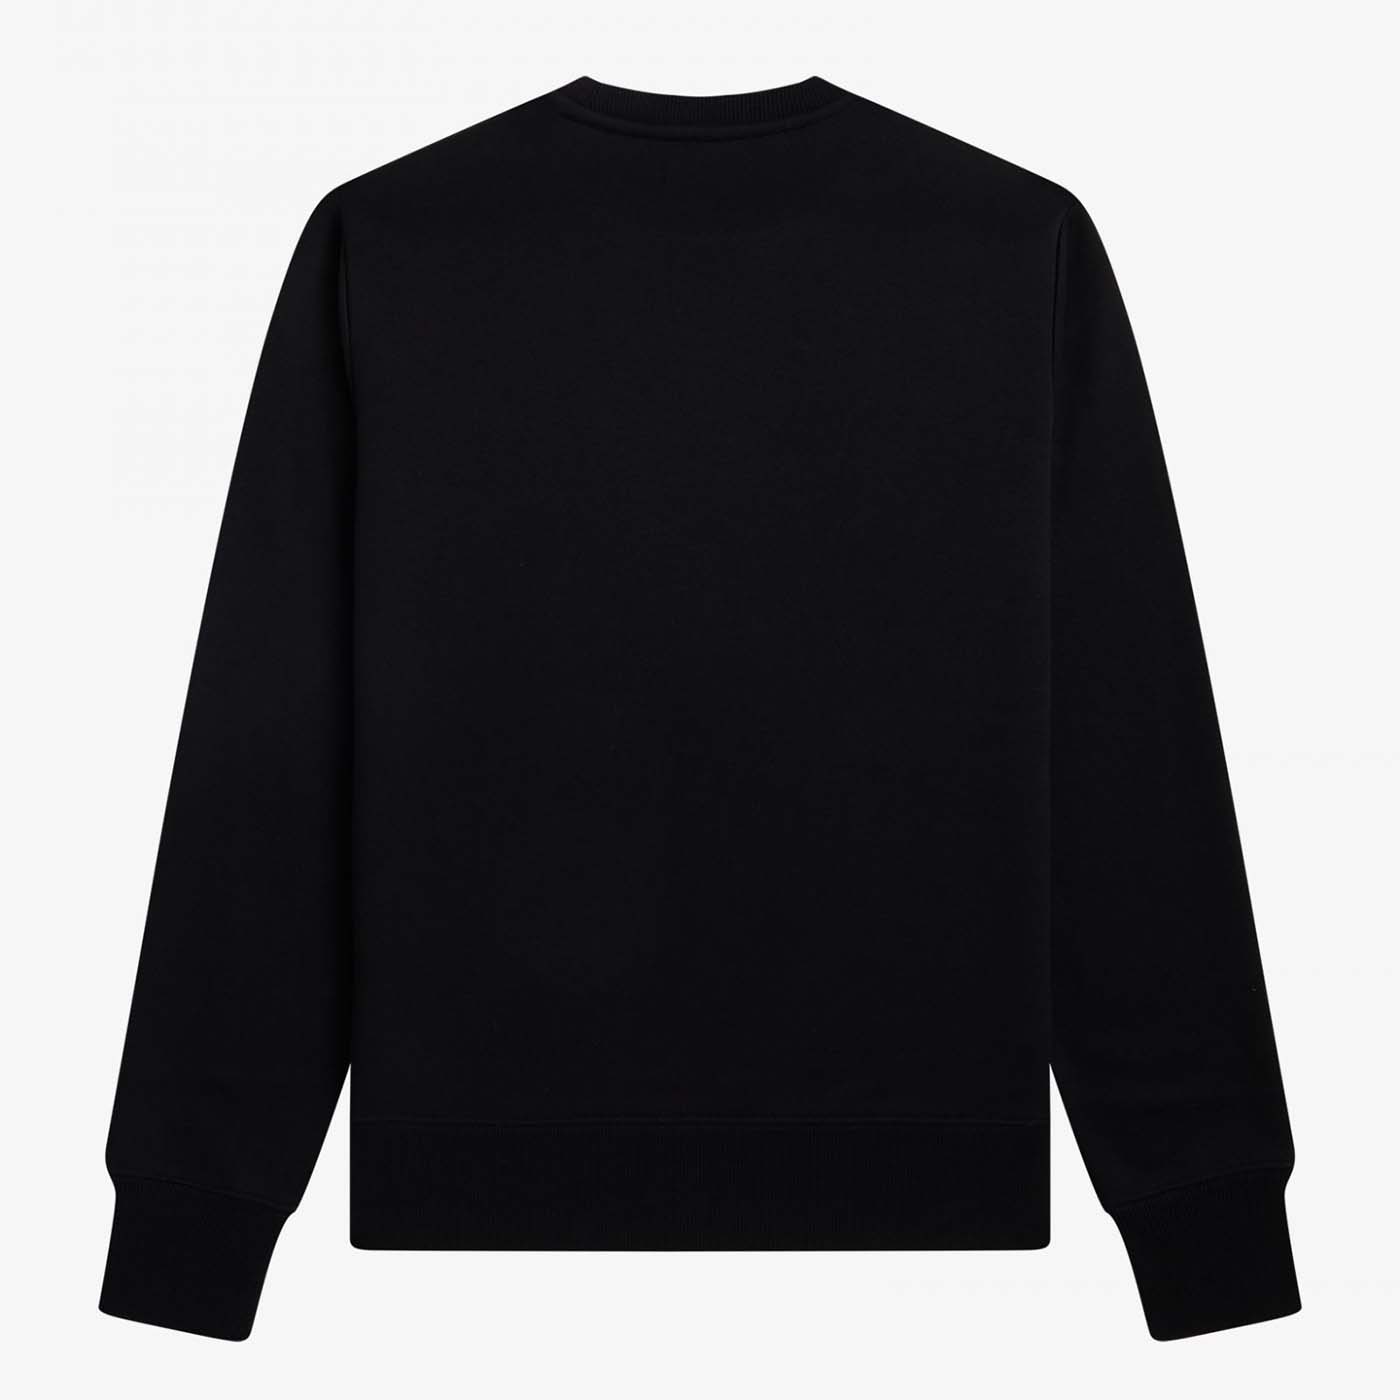 Fred Perry Embroidered Sweatshirt 